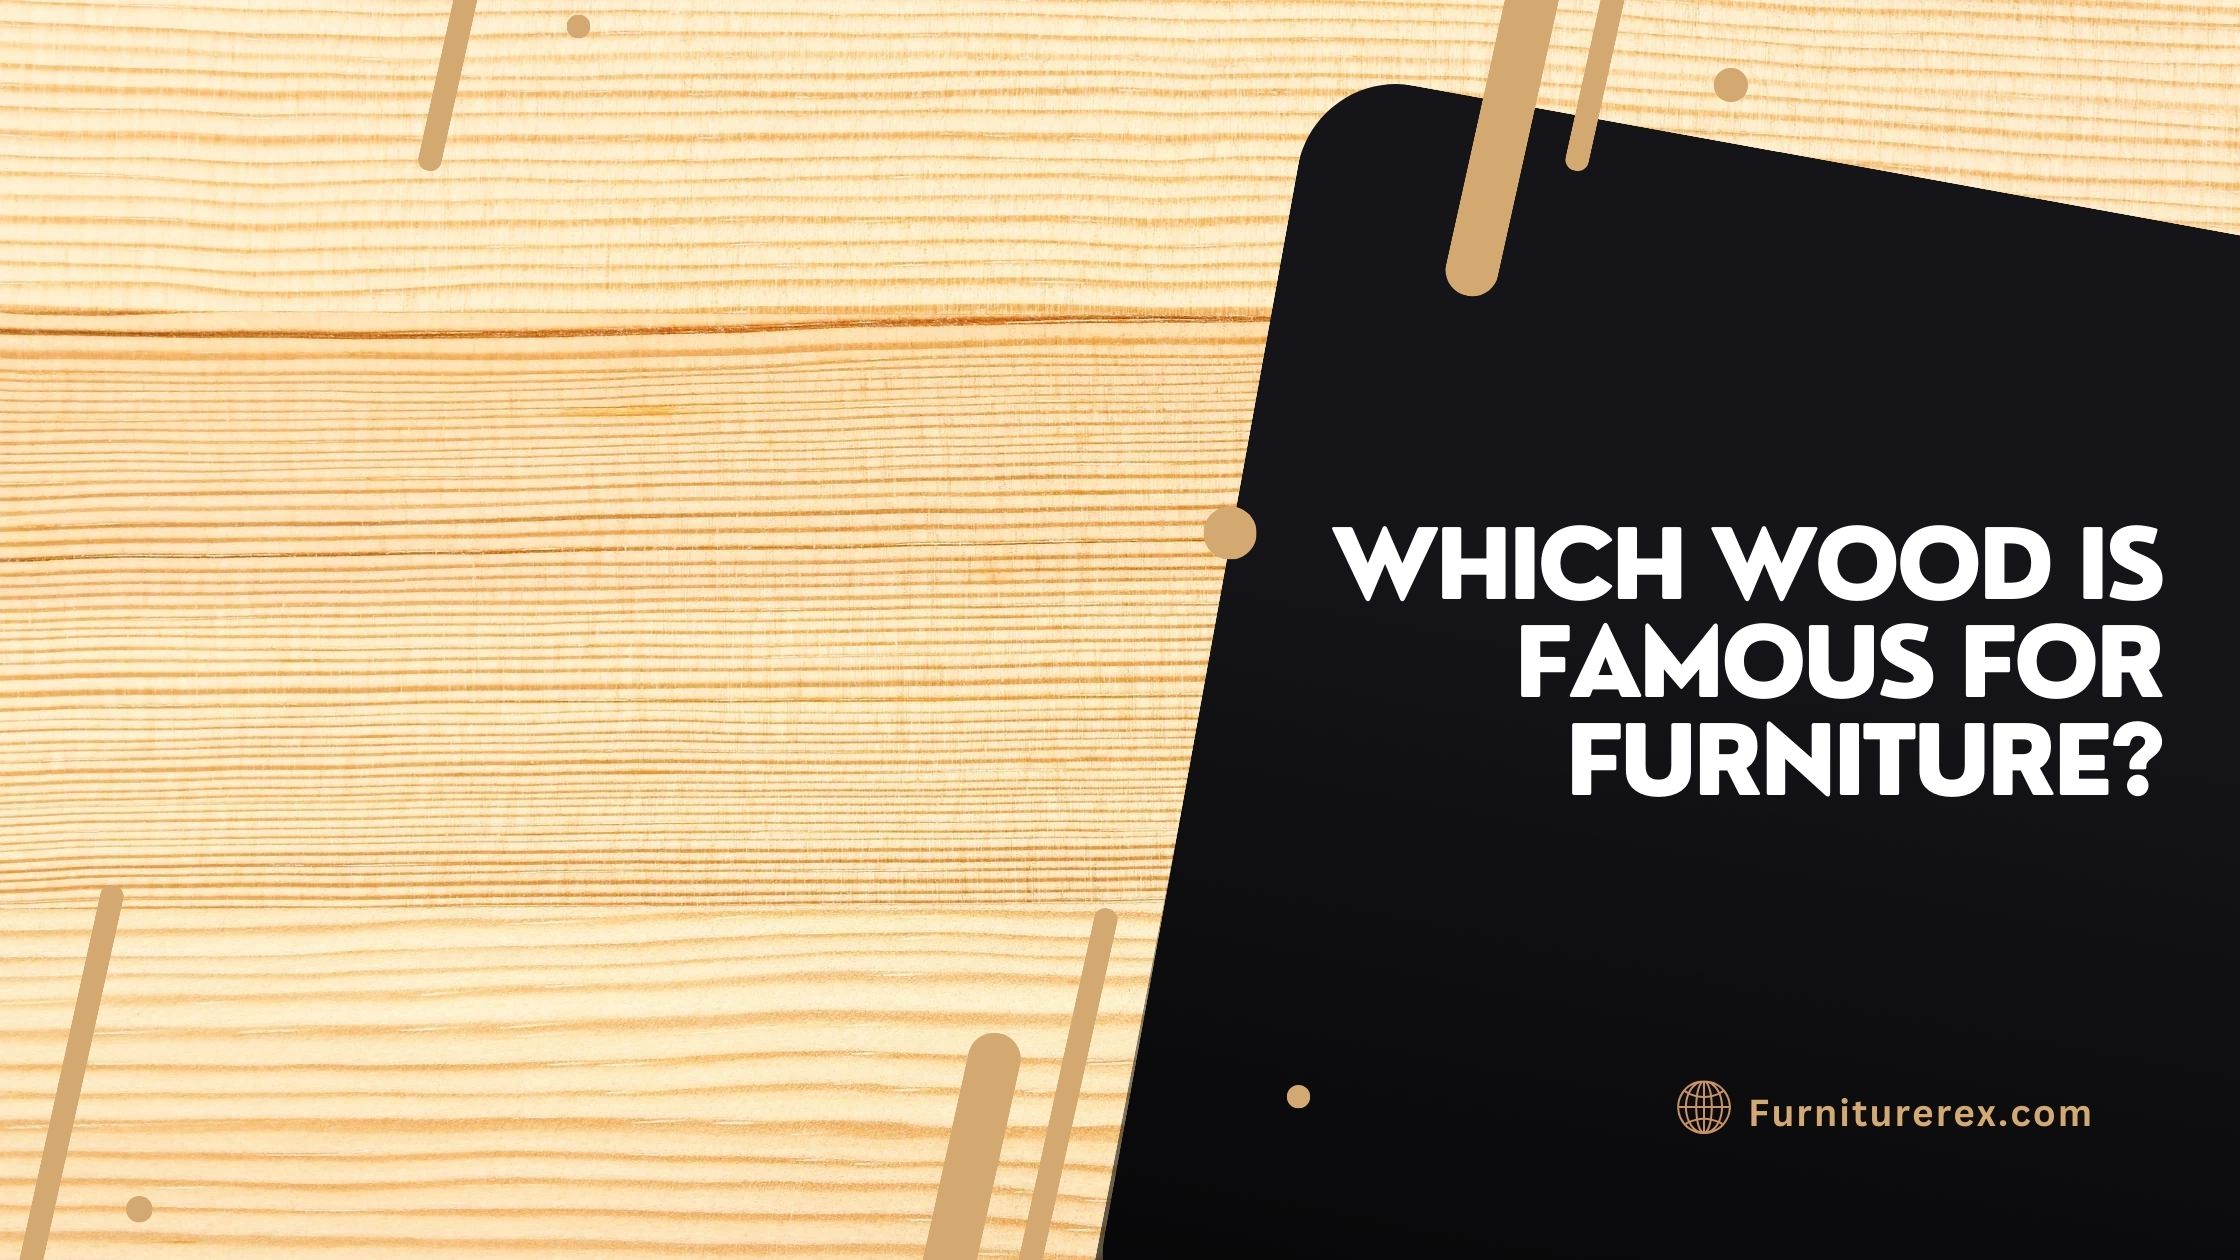 Which wood is famous for furniture